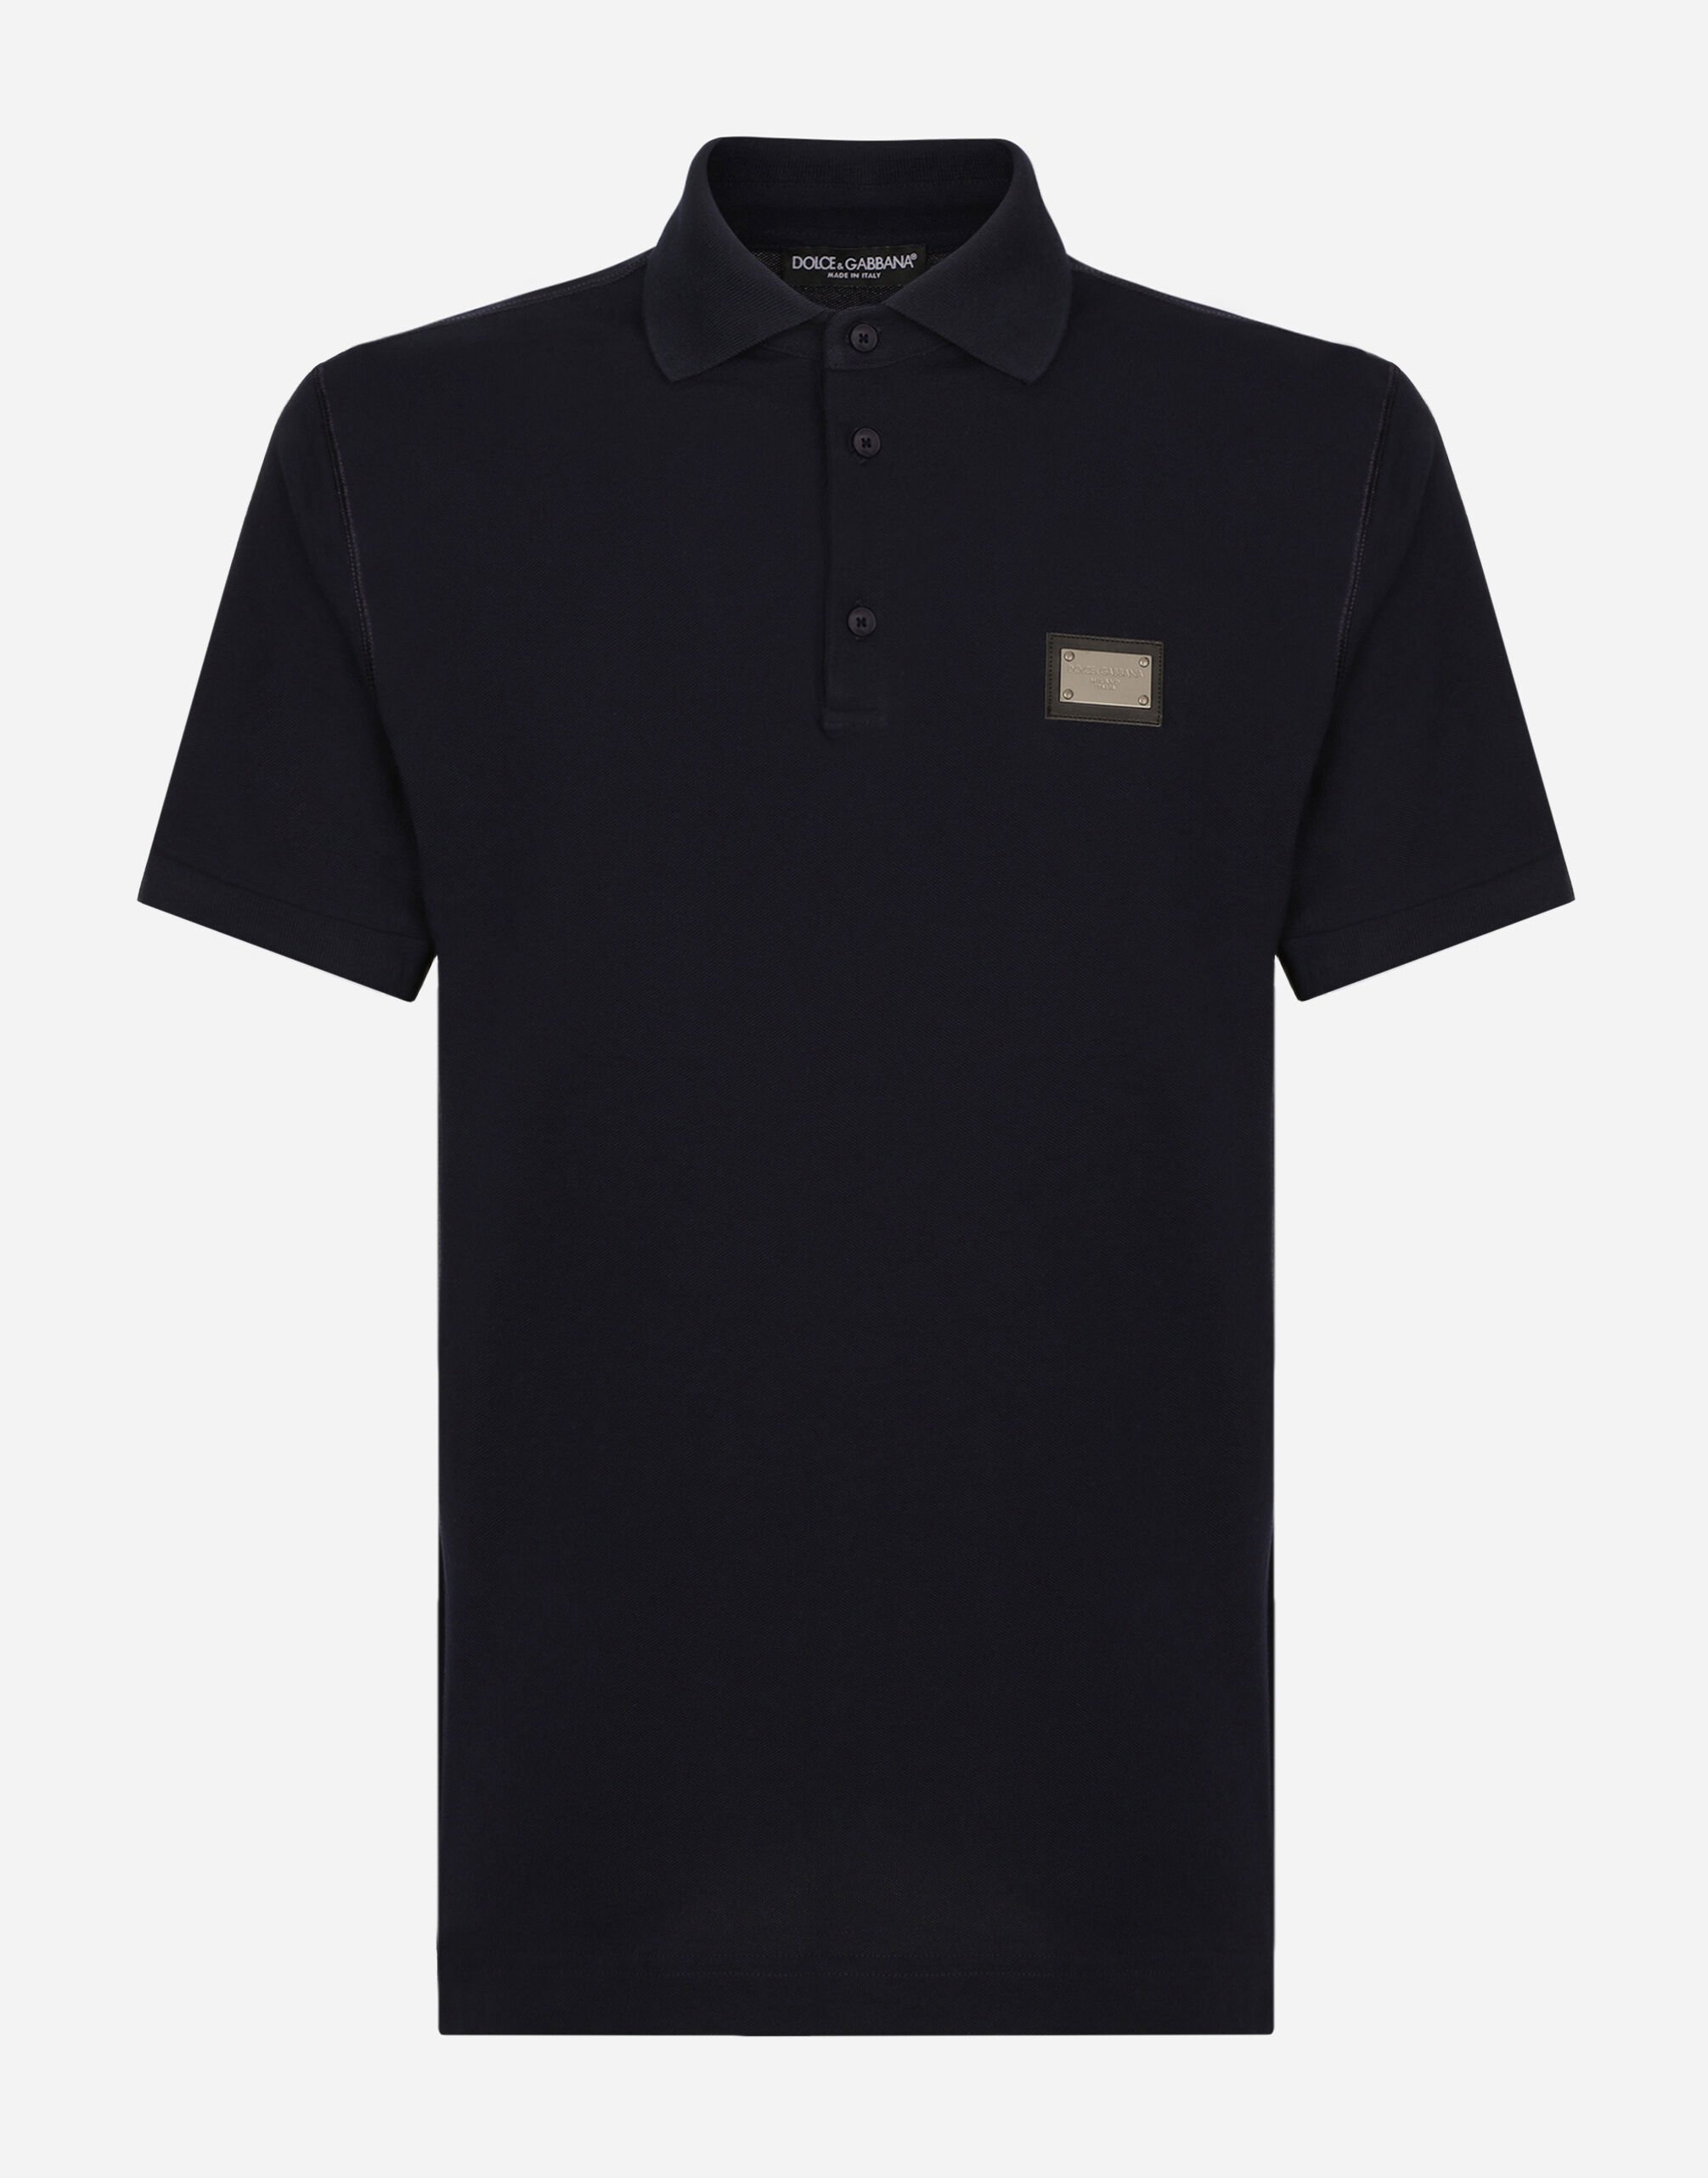 Dolce&Gabbana Cotton piqué polo-shirt with branded tag Blue G8PL4TG7F2H